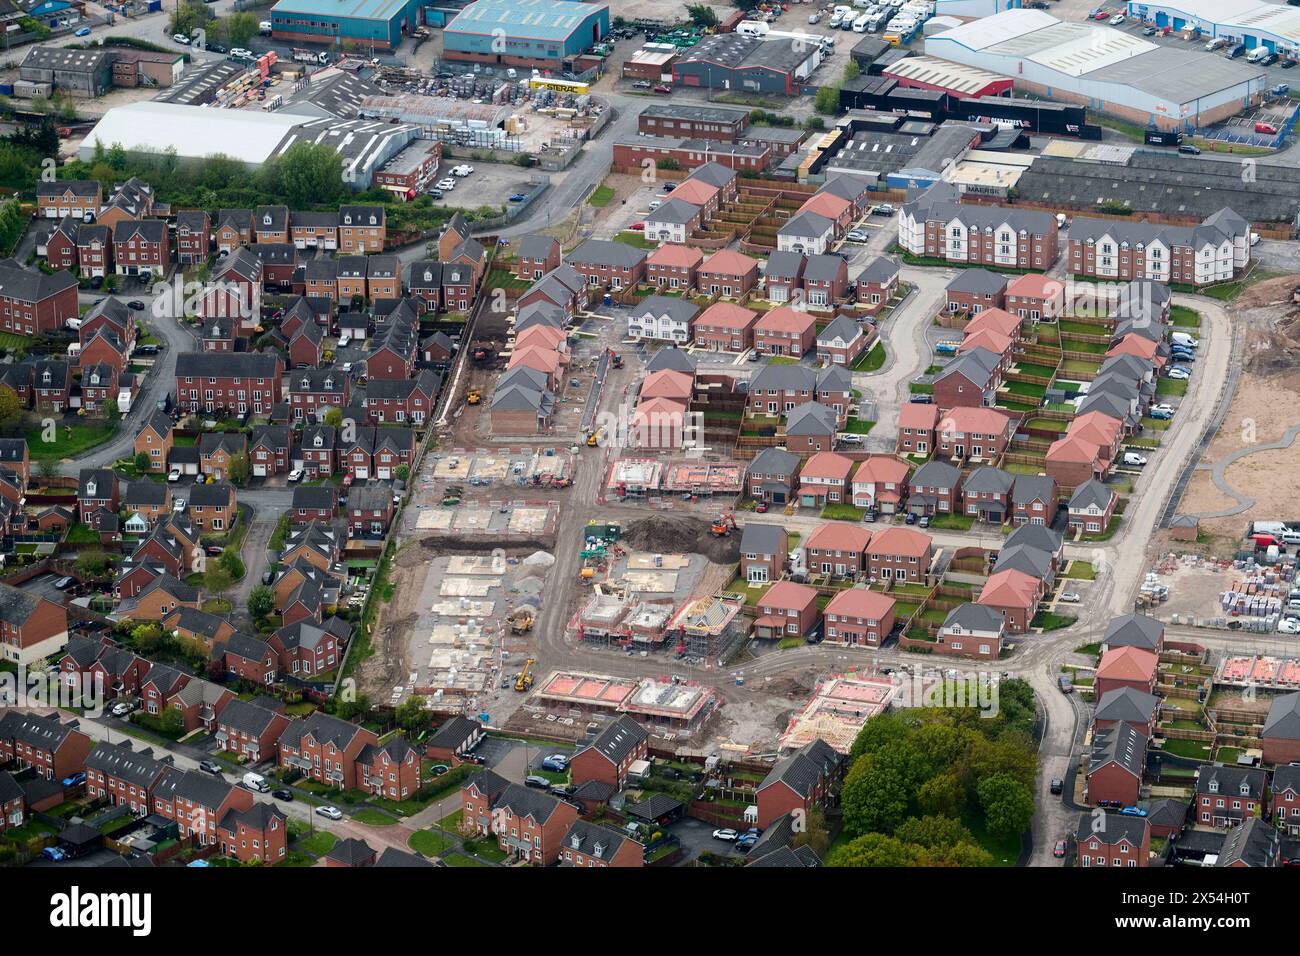 Drone shot of Housebuilding site at Ellesmere Port, Wirral, North West England, UK Stock Photo